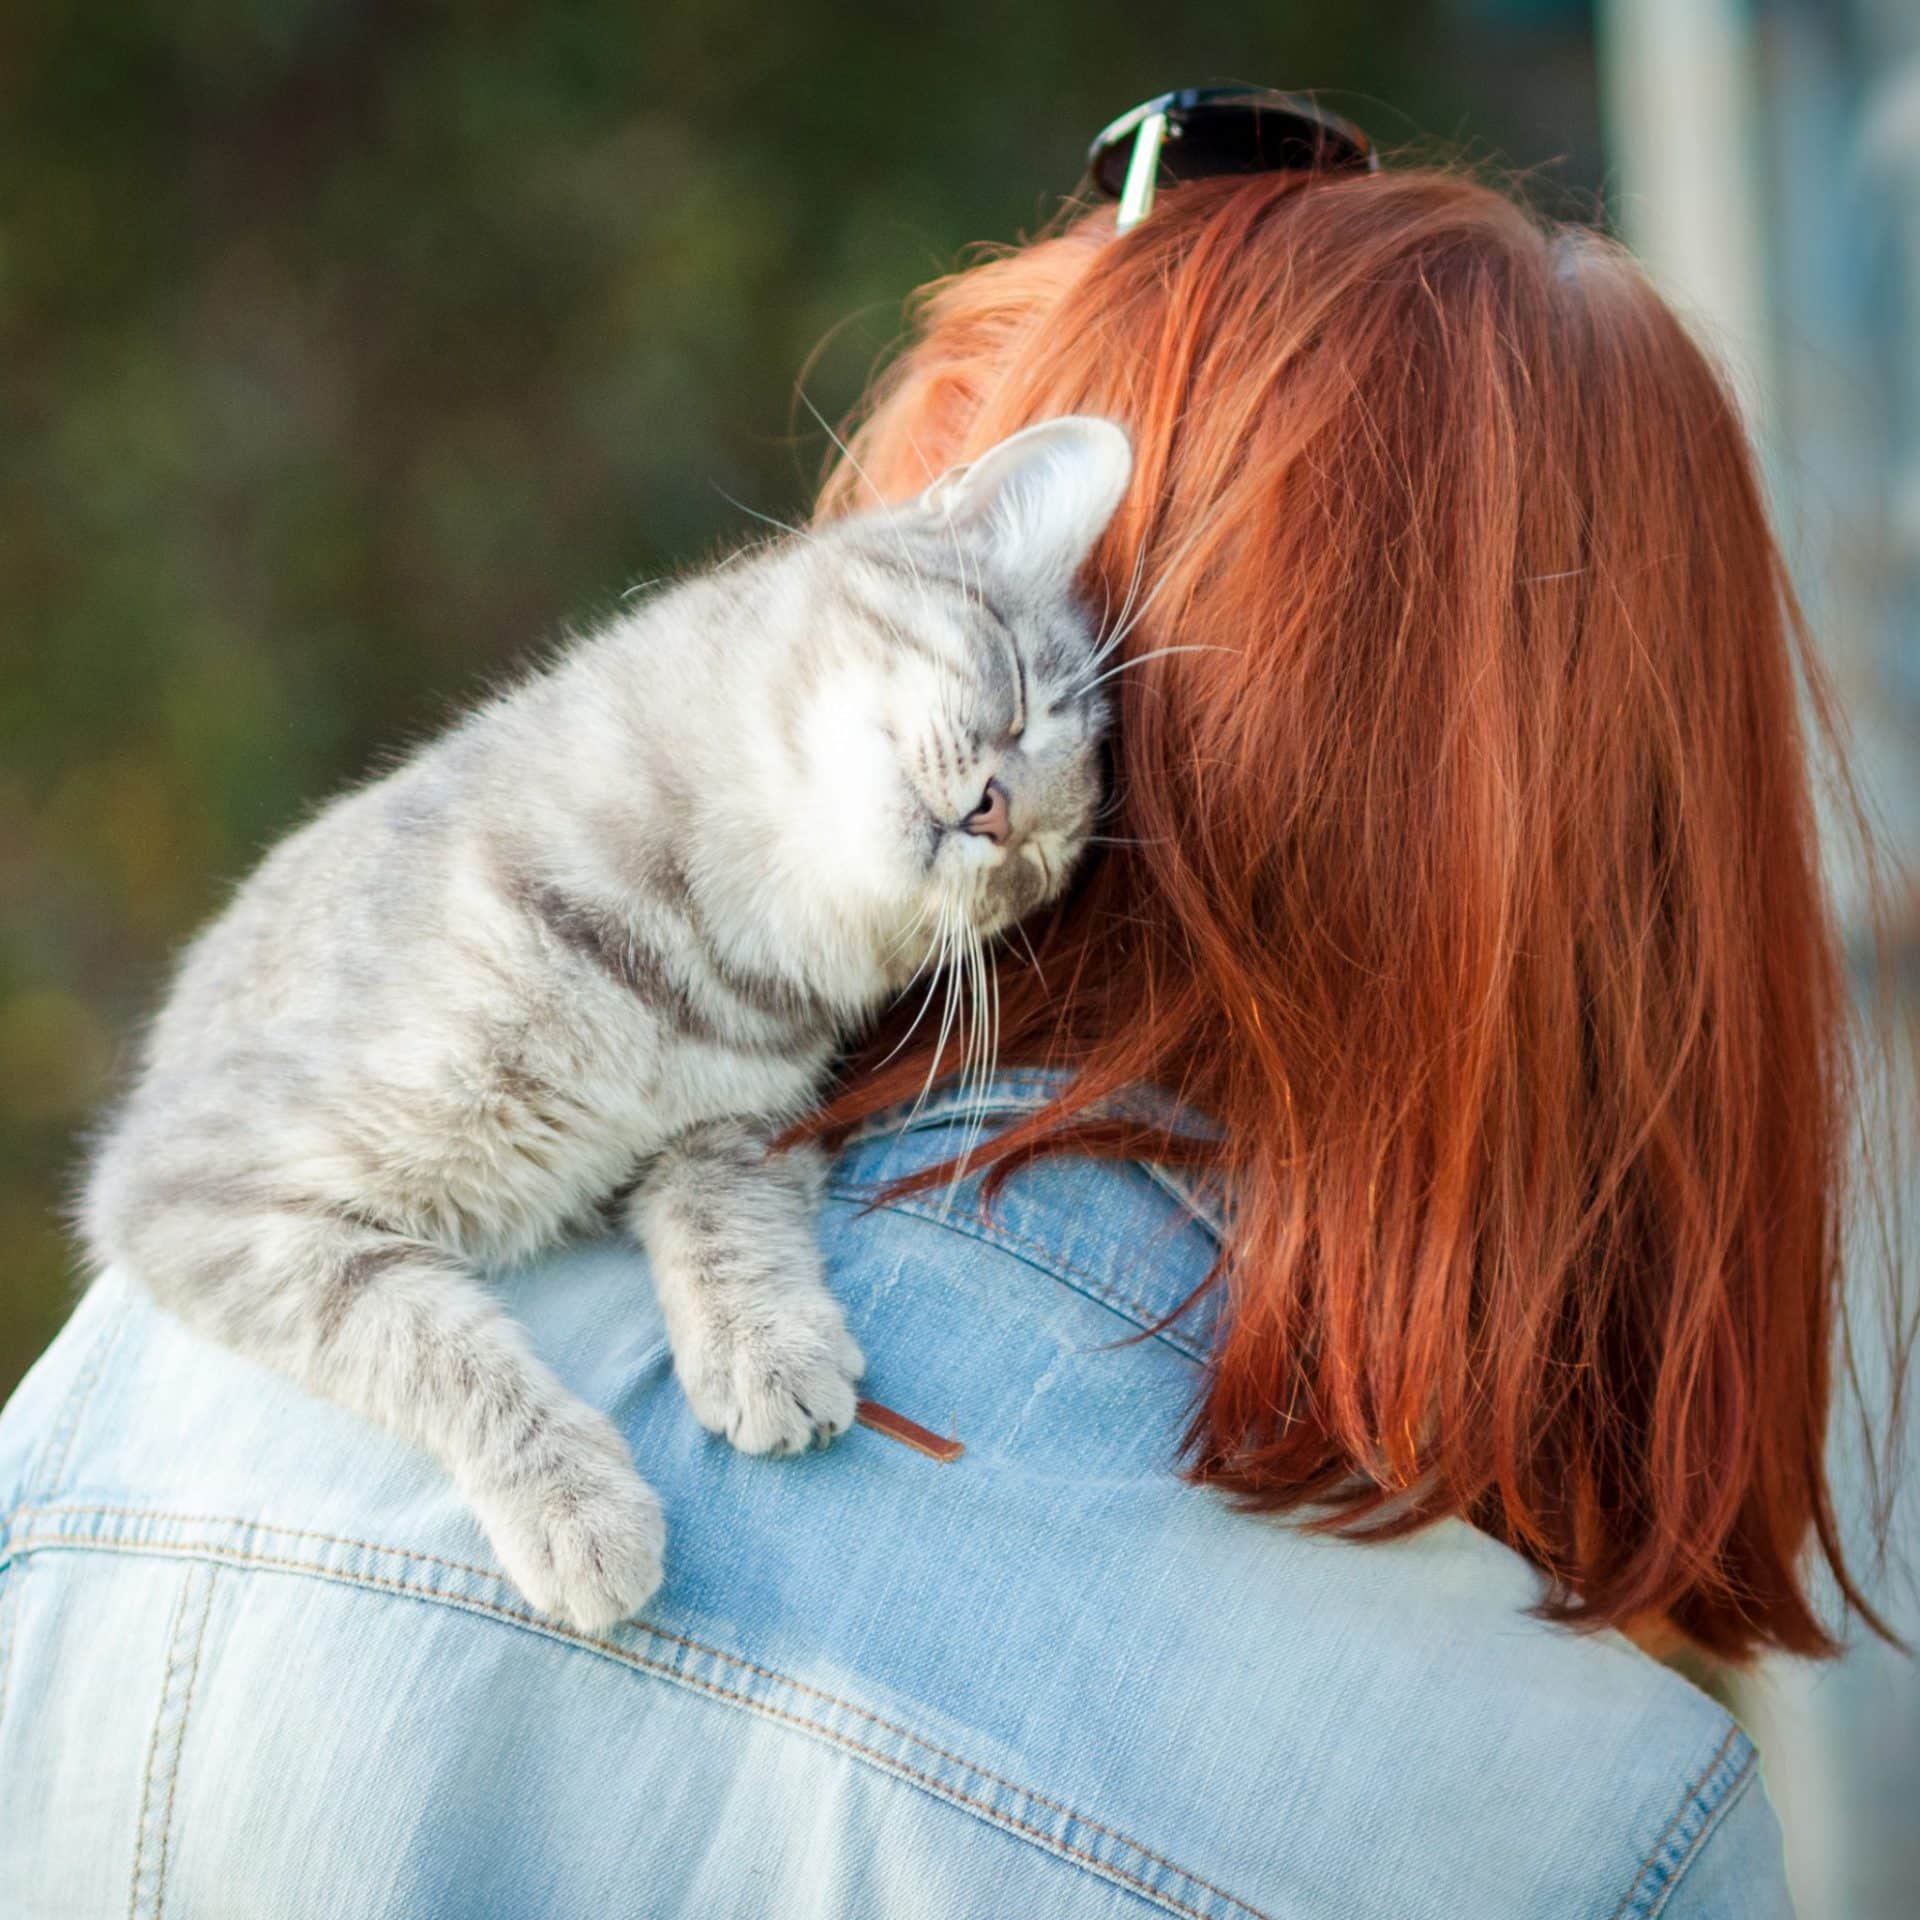 pet parenting mistakes are easily avoided